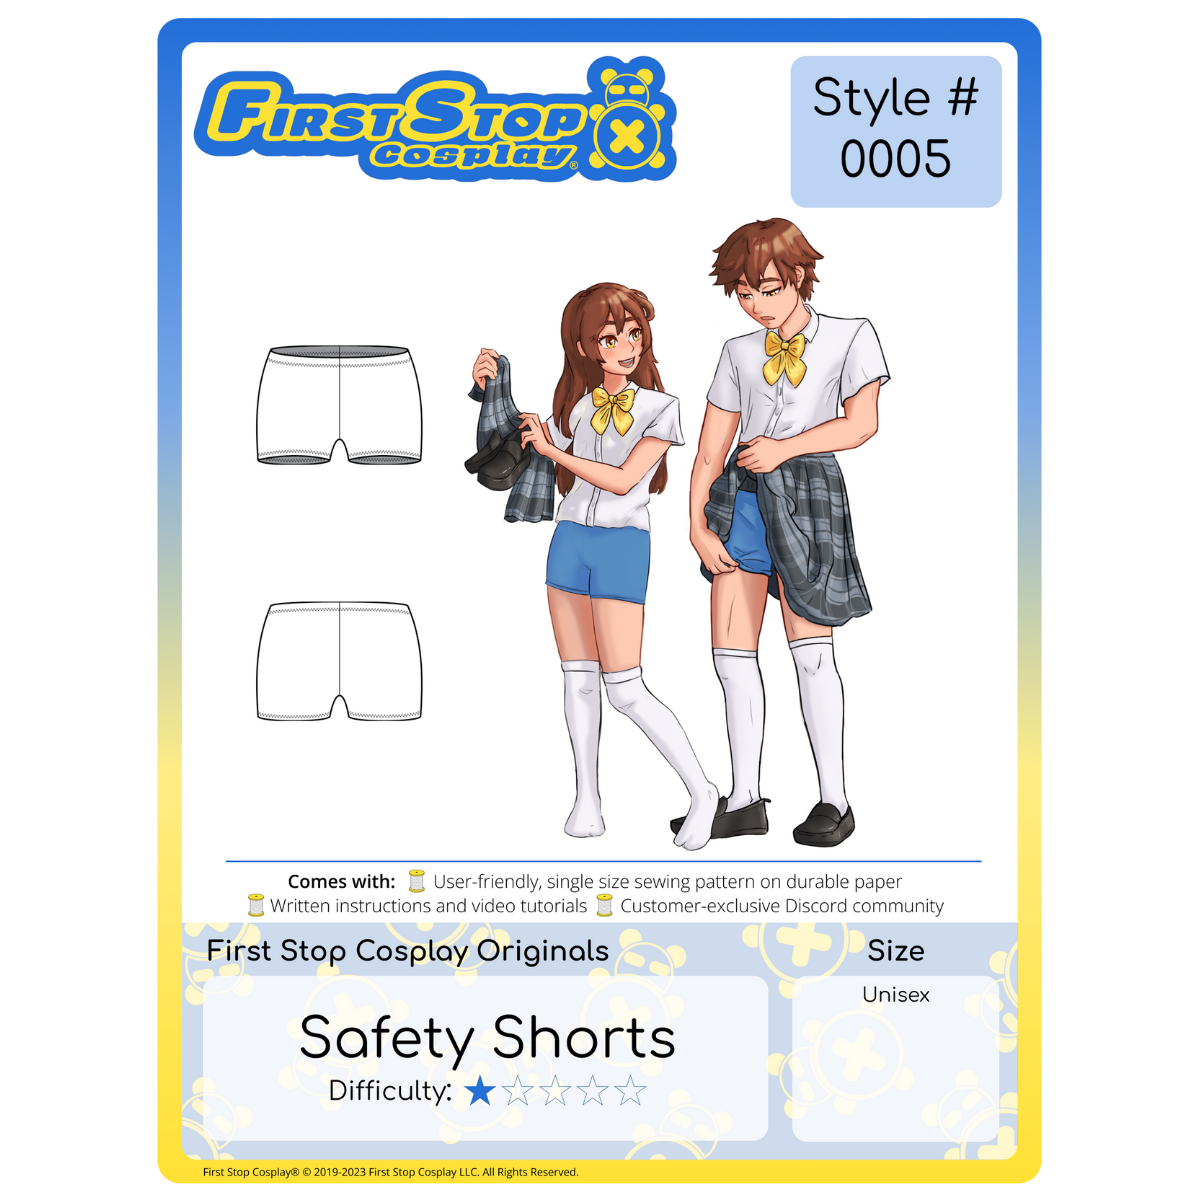 A graphic of the front packaging for Style #0005- Safety Shorts. The First Stop Cosplay logo is in the top left corner. Below the logo is line art of the completed pattern. To the right is an image of our female & male characters, Pan & Dah, wearing the completed Safety Shorts with a female school uniform. This pattern is 1 star in difficulty rating and follows our unisex size chart.